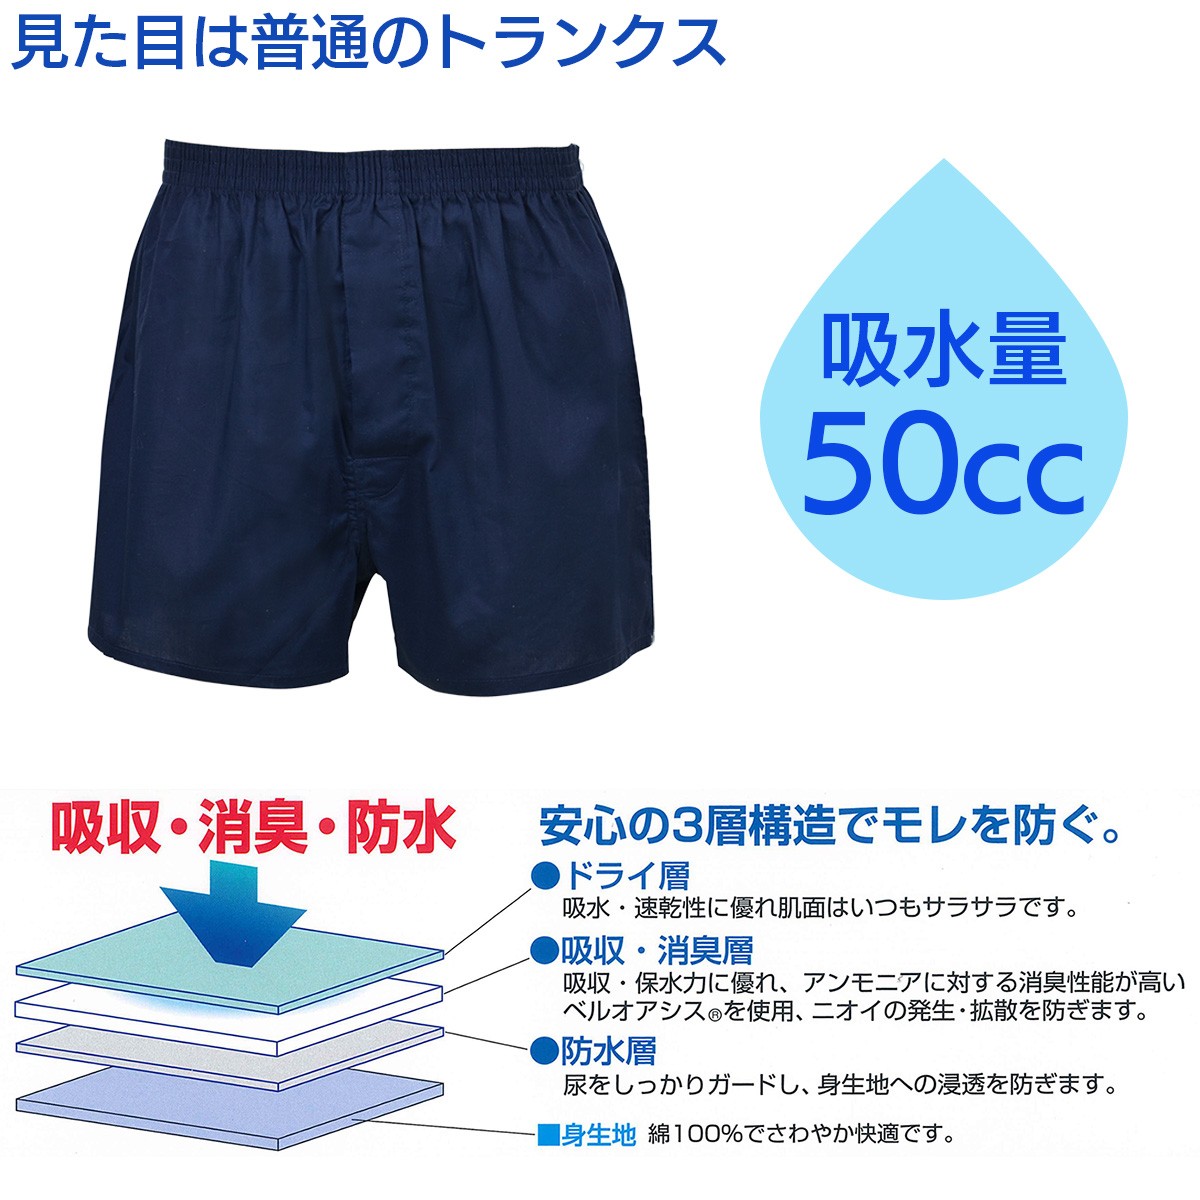  incontinence pants incontinence for man 3 color collection 50cc made in Japan firmly ga- Delon g guard trunks - men's comfortable pants incontinence pants safety pants front opening deodorization waterproof 